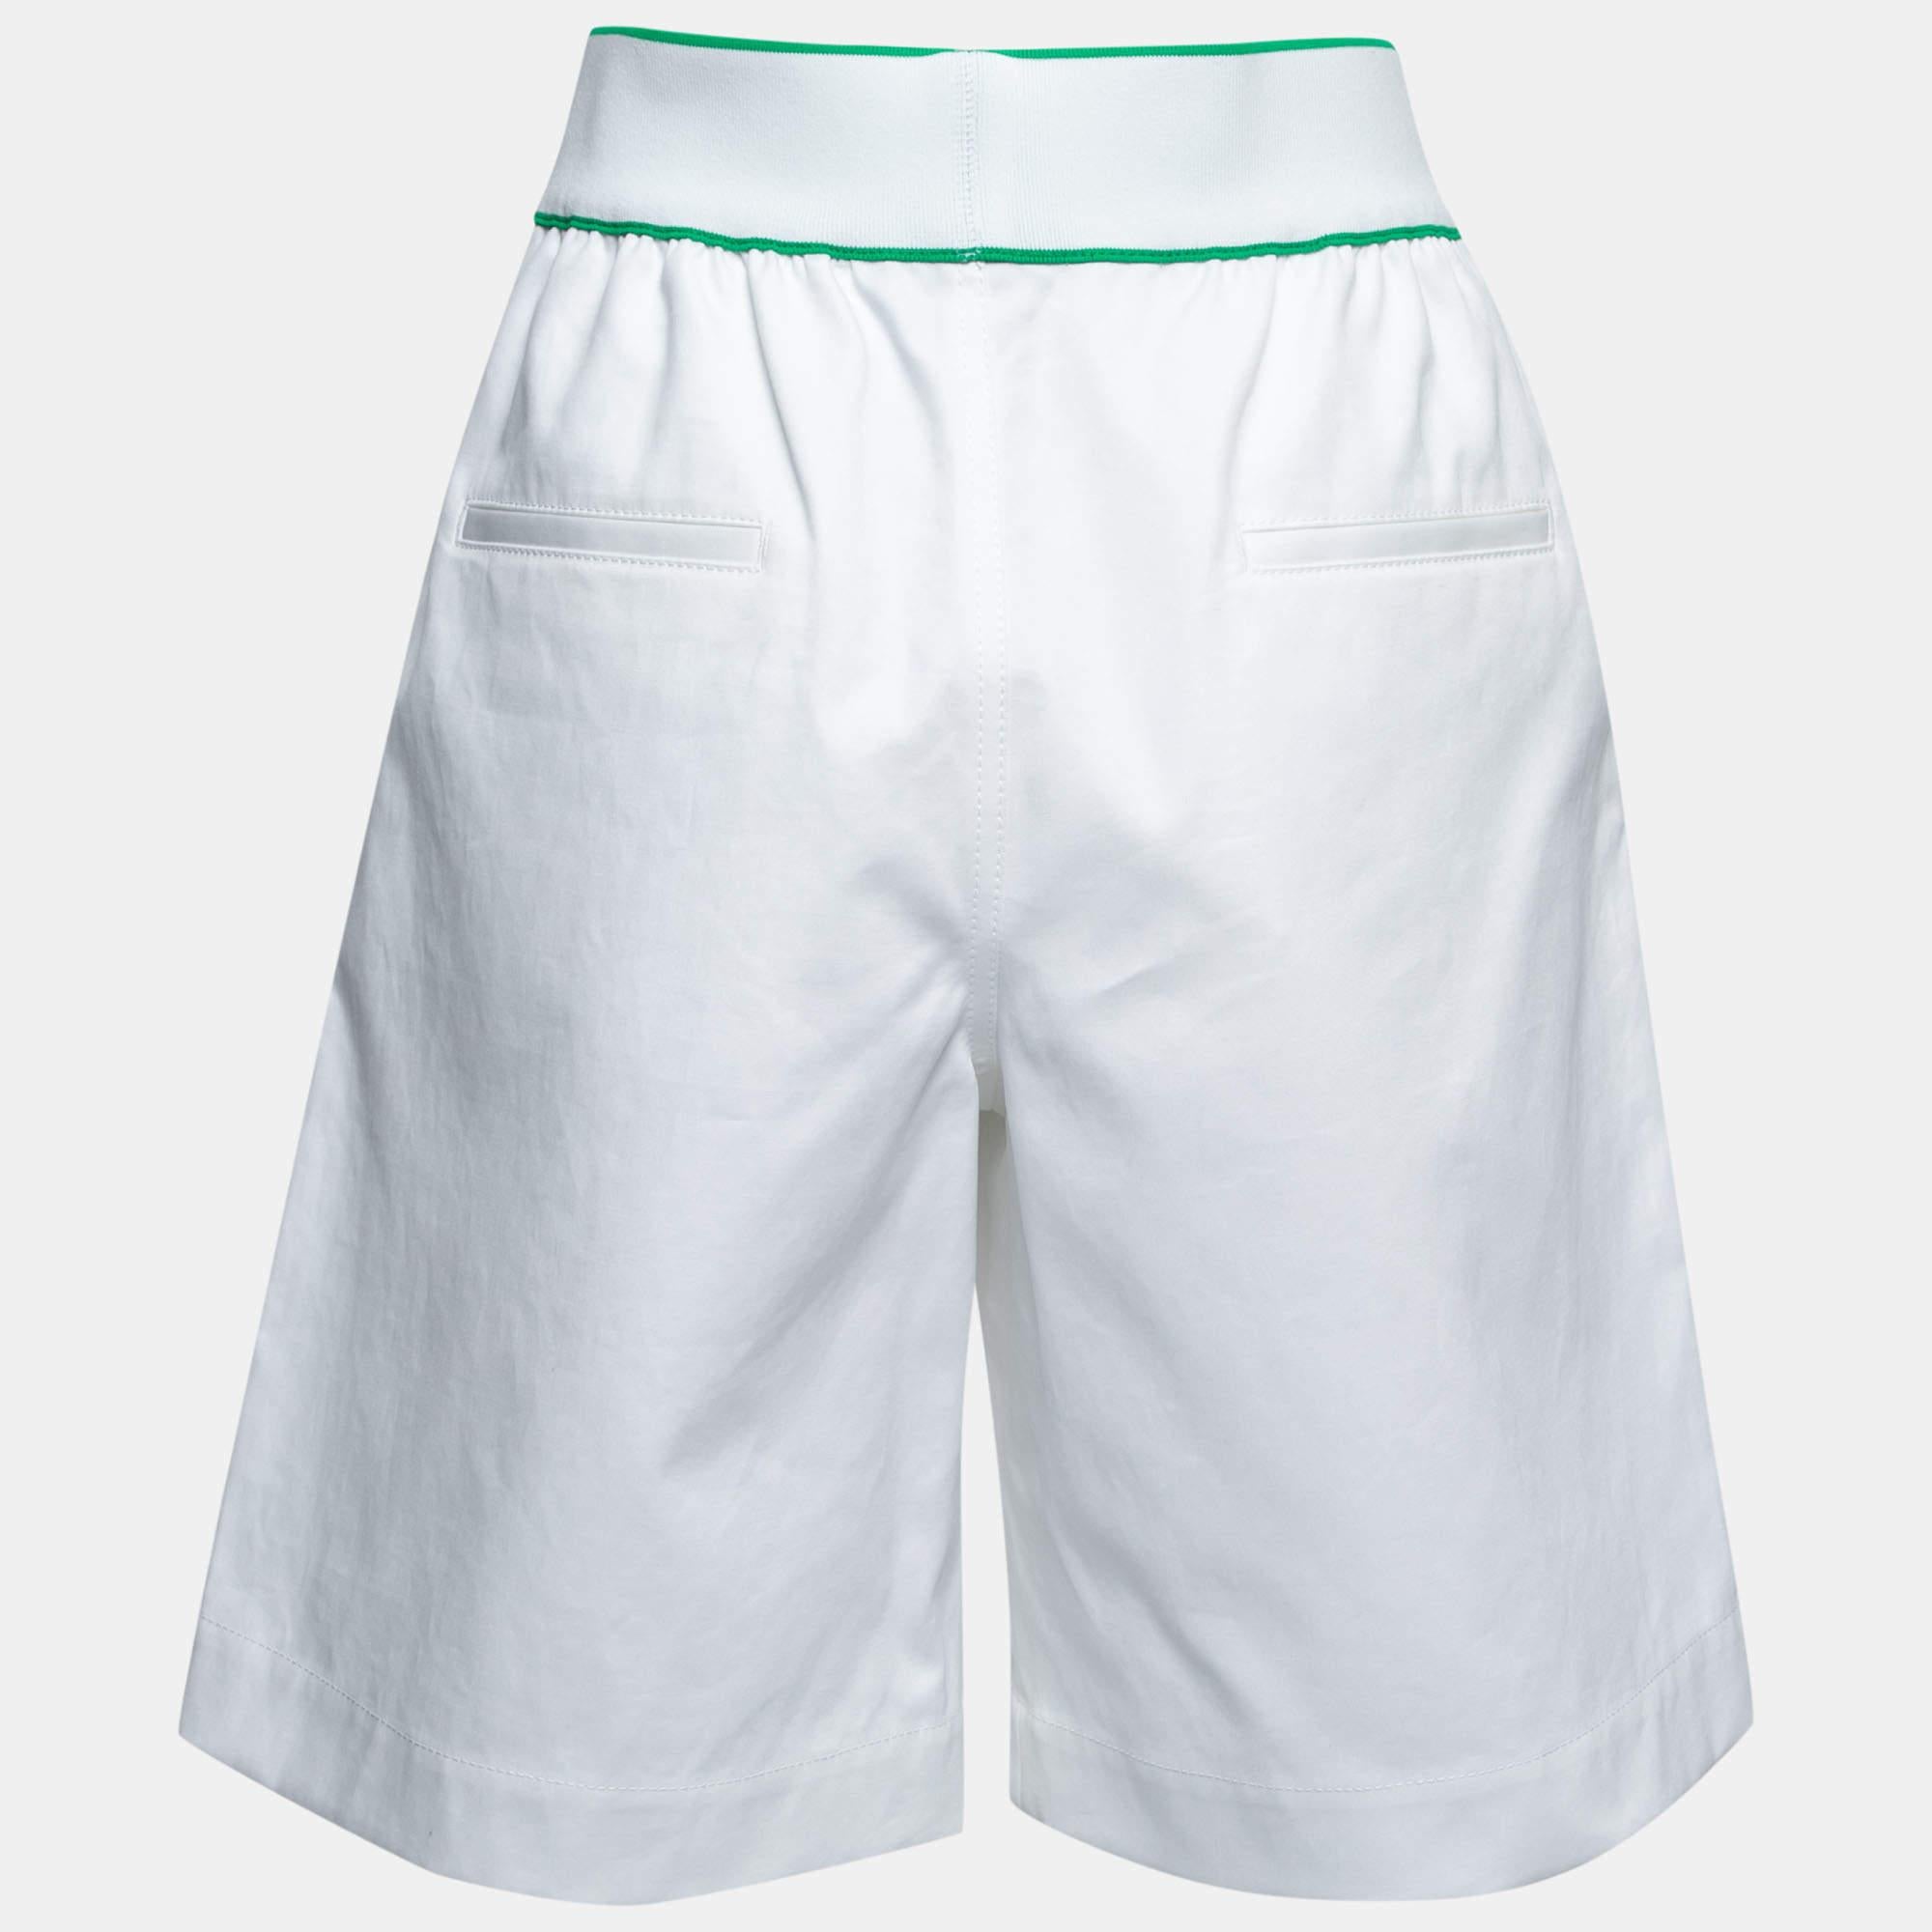 These shorts are a comfy and stylish pick for your vacation. Easy to style and classy in appearance, these shorts will be your favorite!

Includes: Brand Tags
